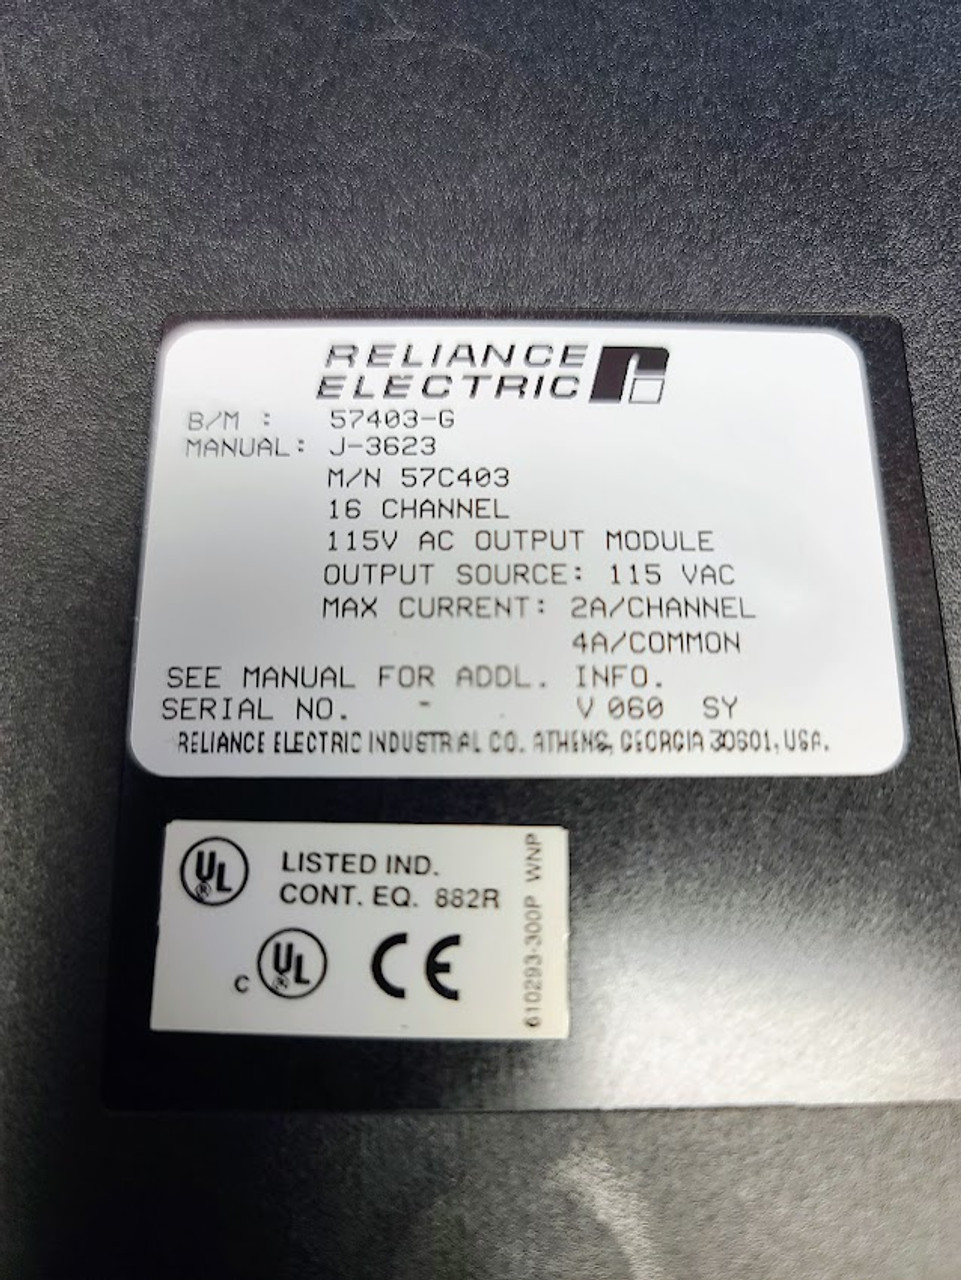 Reliance Electric AutoMax 16 Channel 115VAC Output Module 57403-G